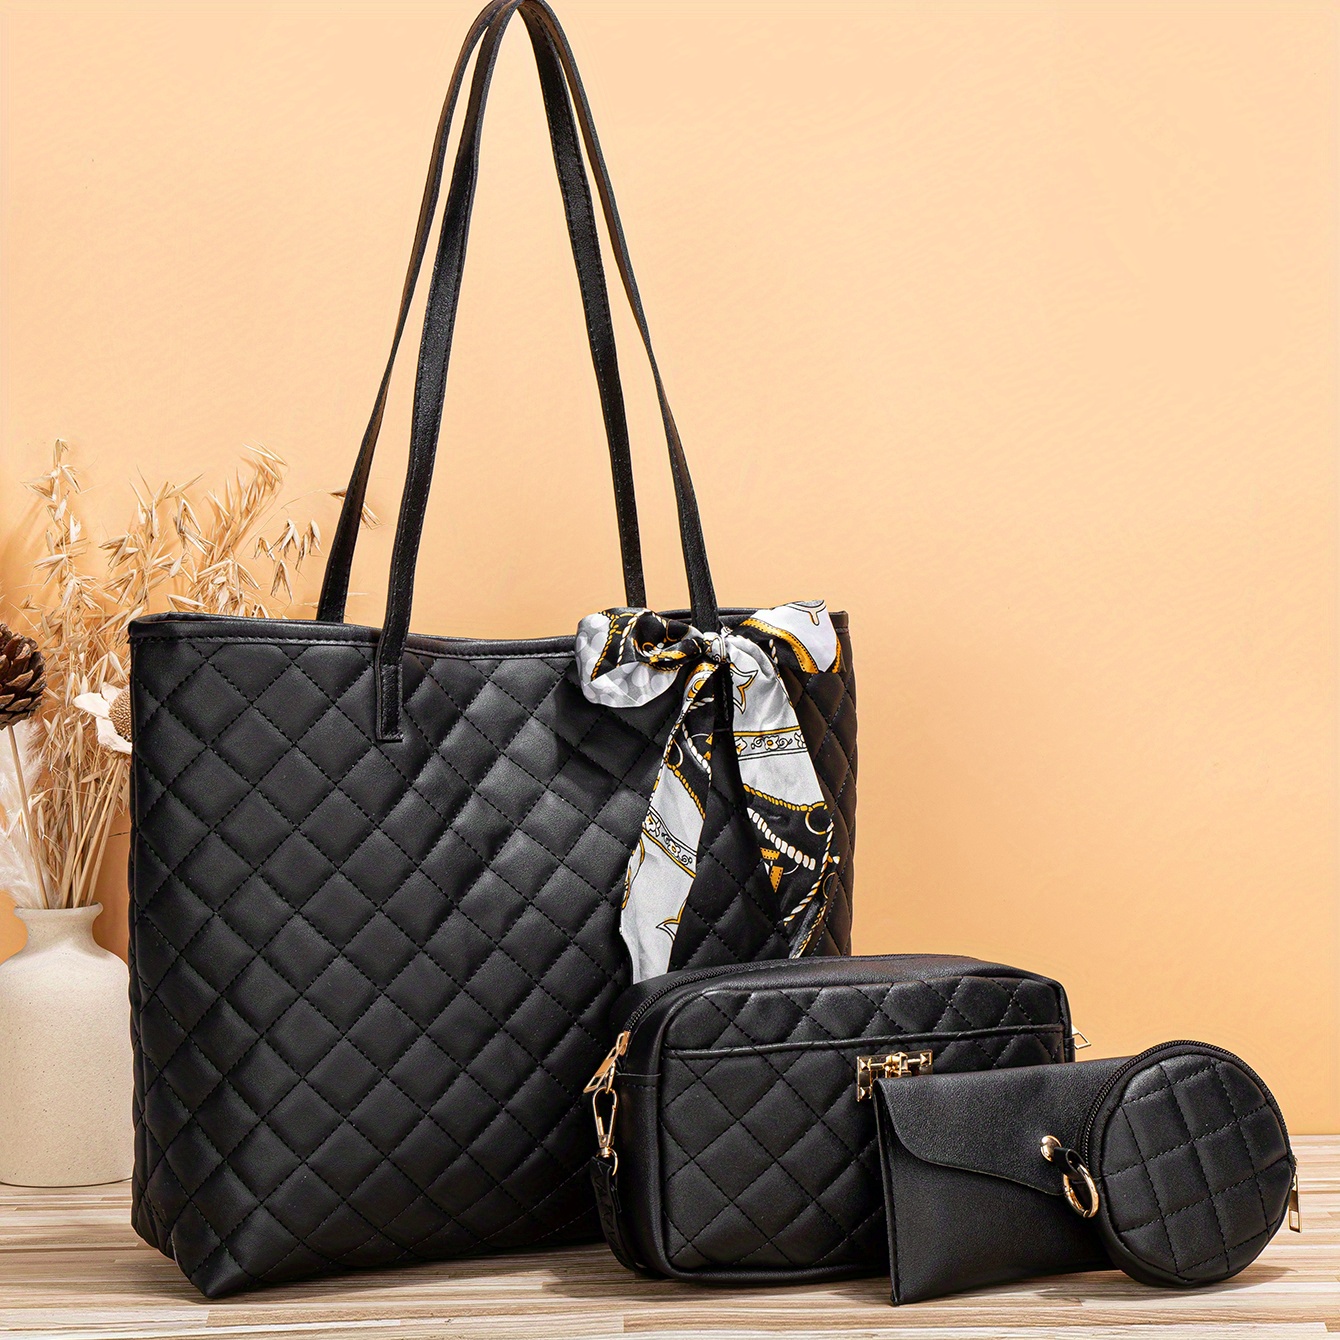 Quilted Tote Bag Black - Women's Tote Bags